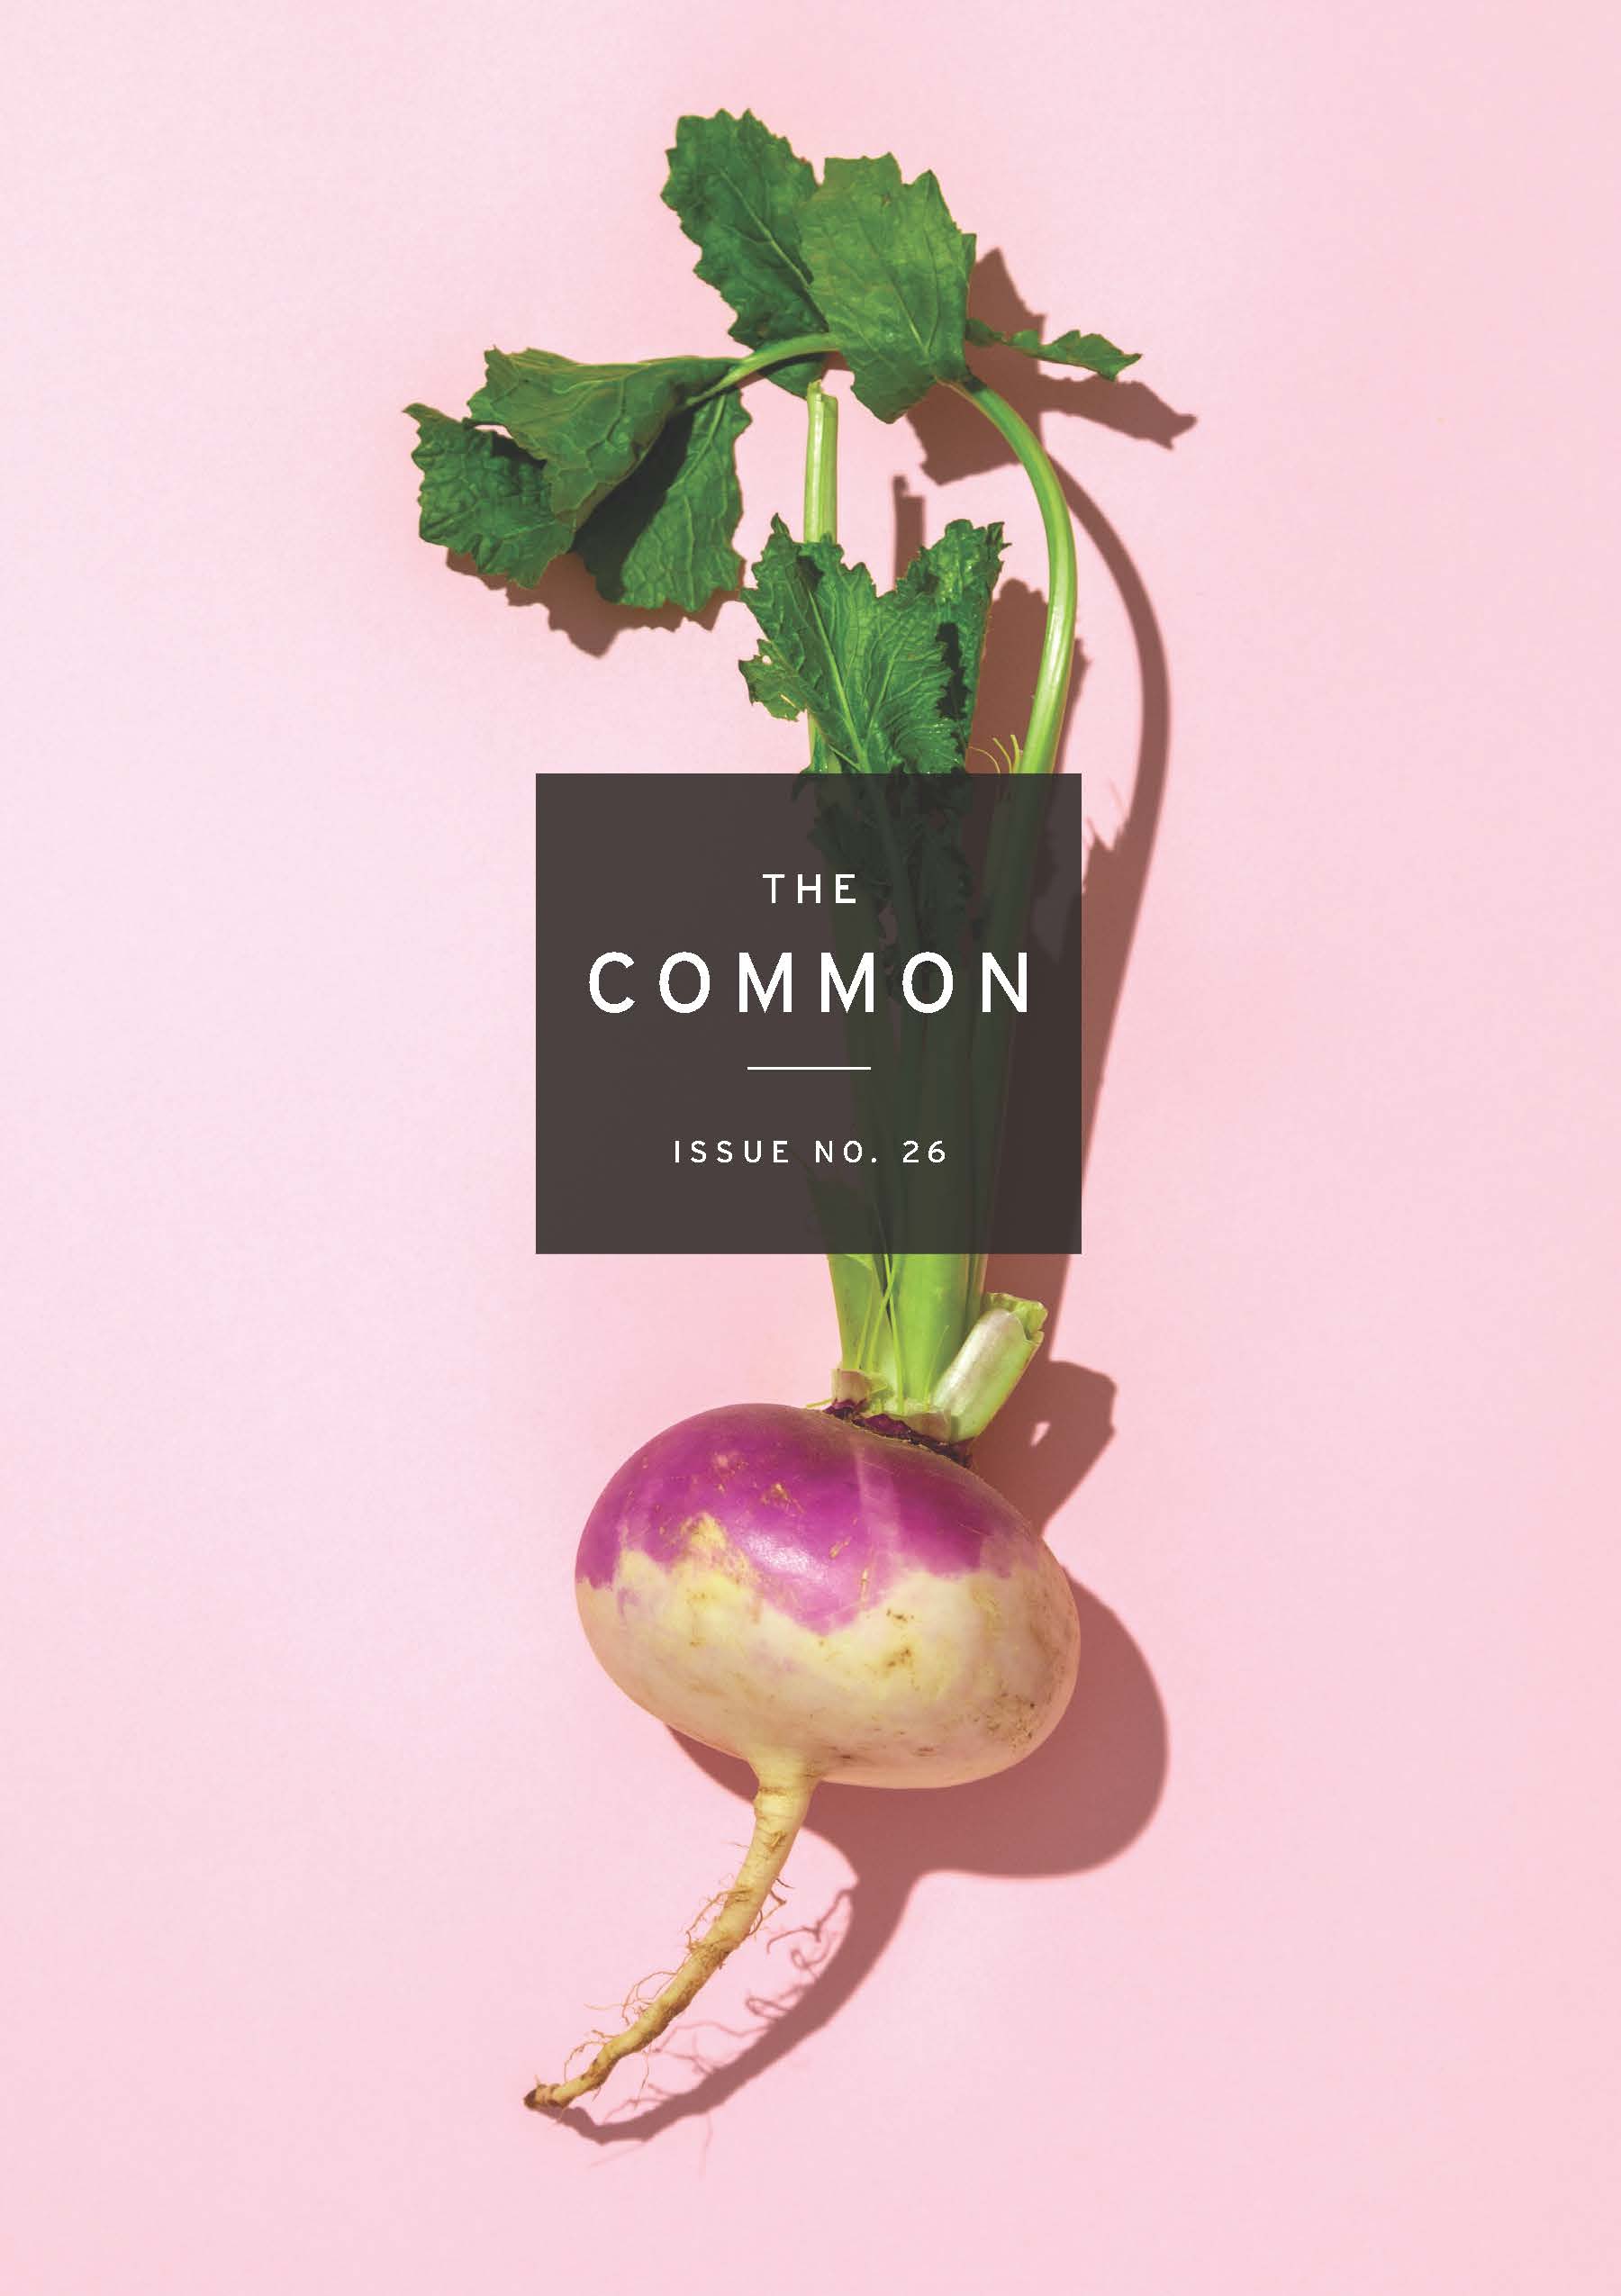 Issue 26 cover: light pink background with a turnip and greens